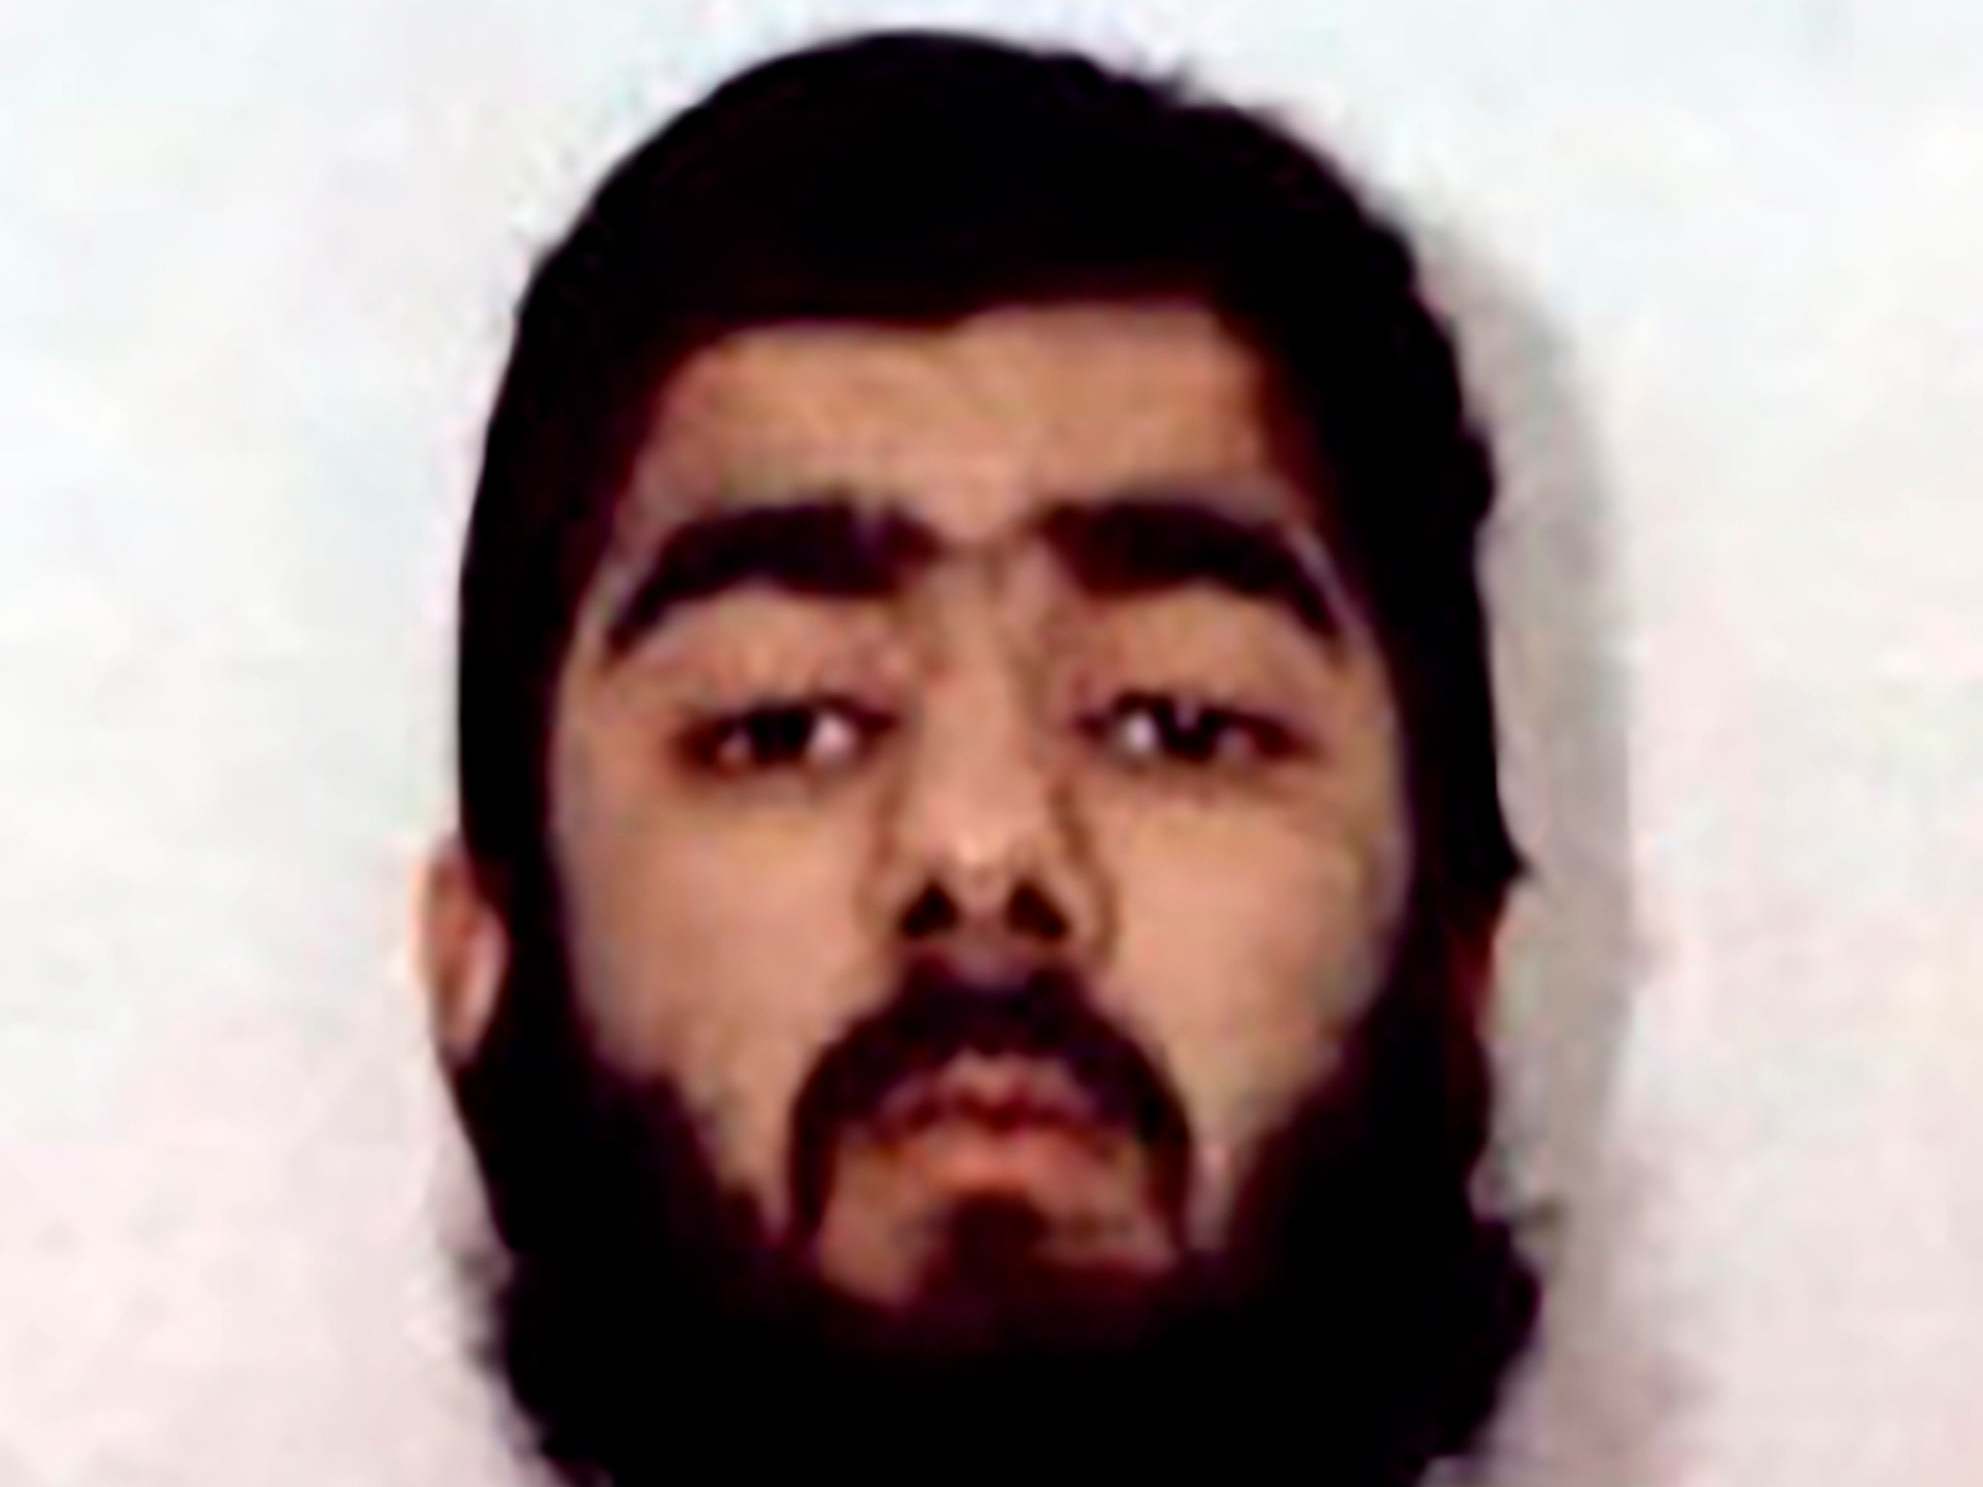 Usman Khan, 28, was being monitored following his release from prison when he launched his attack on 29 November 2019